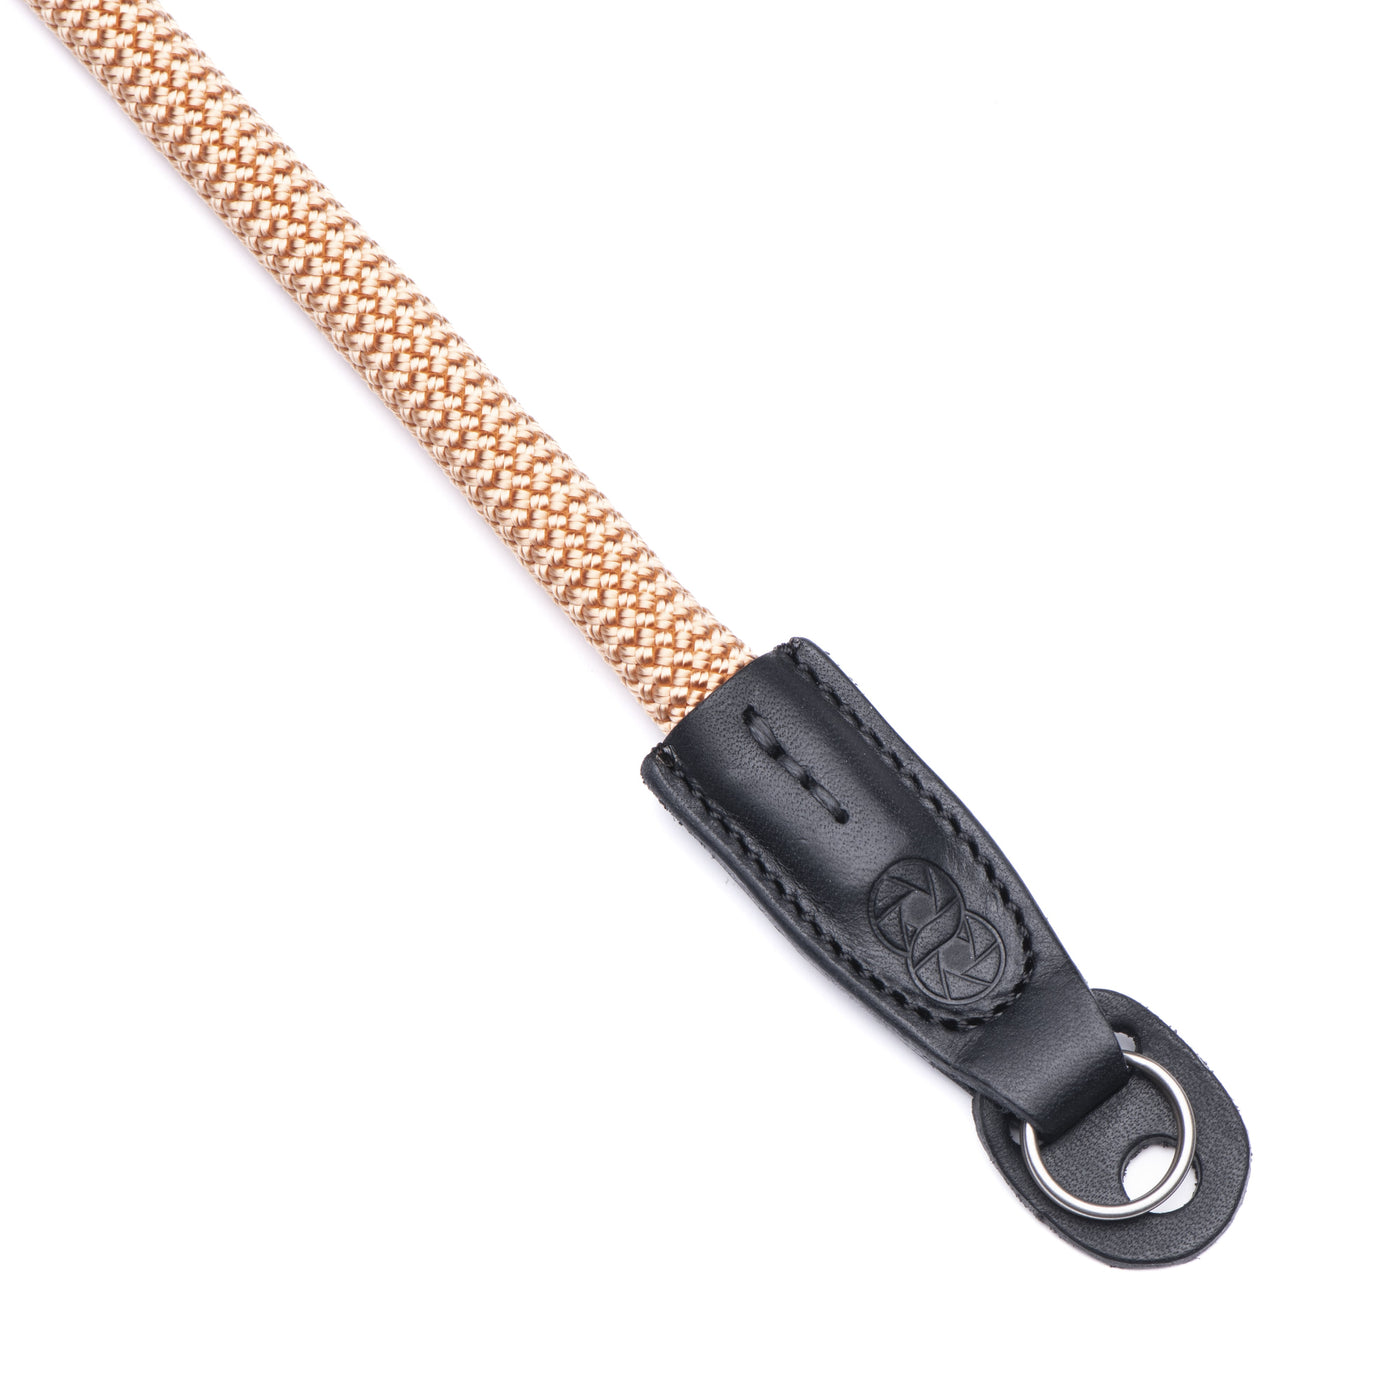 Leather ends of a peach rope strap with steel rings 